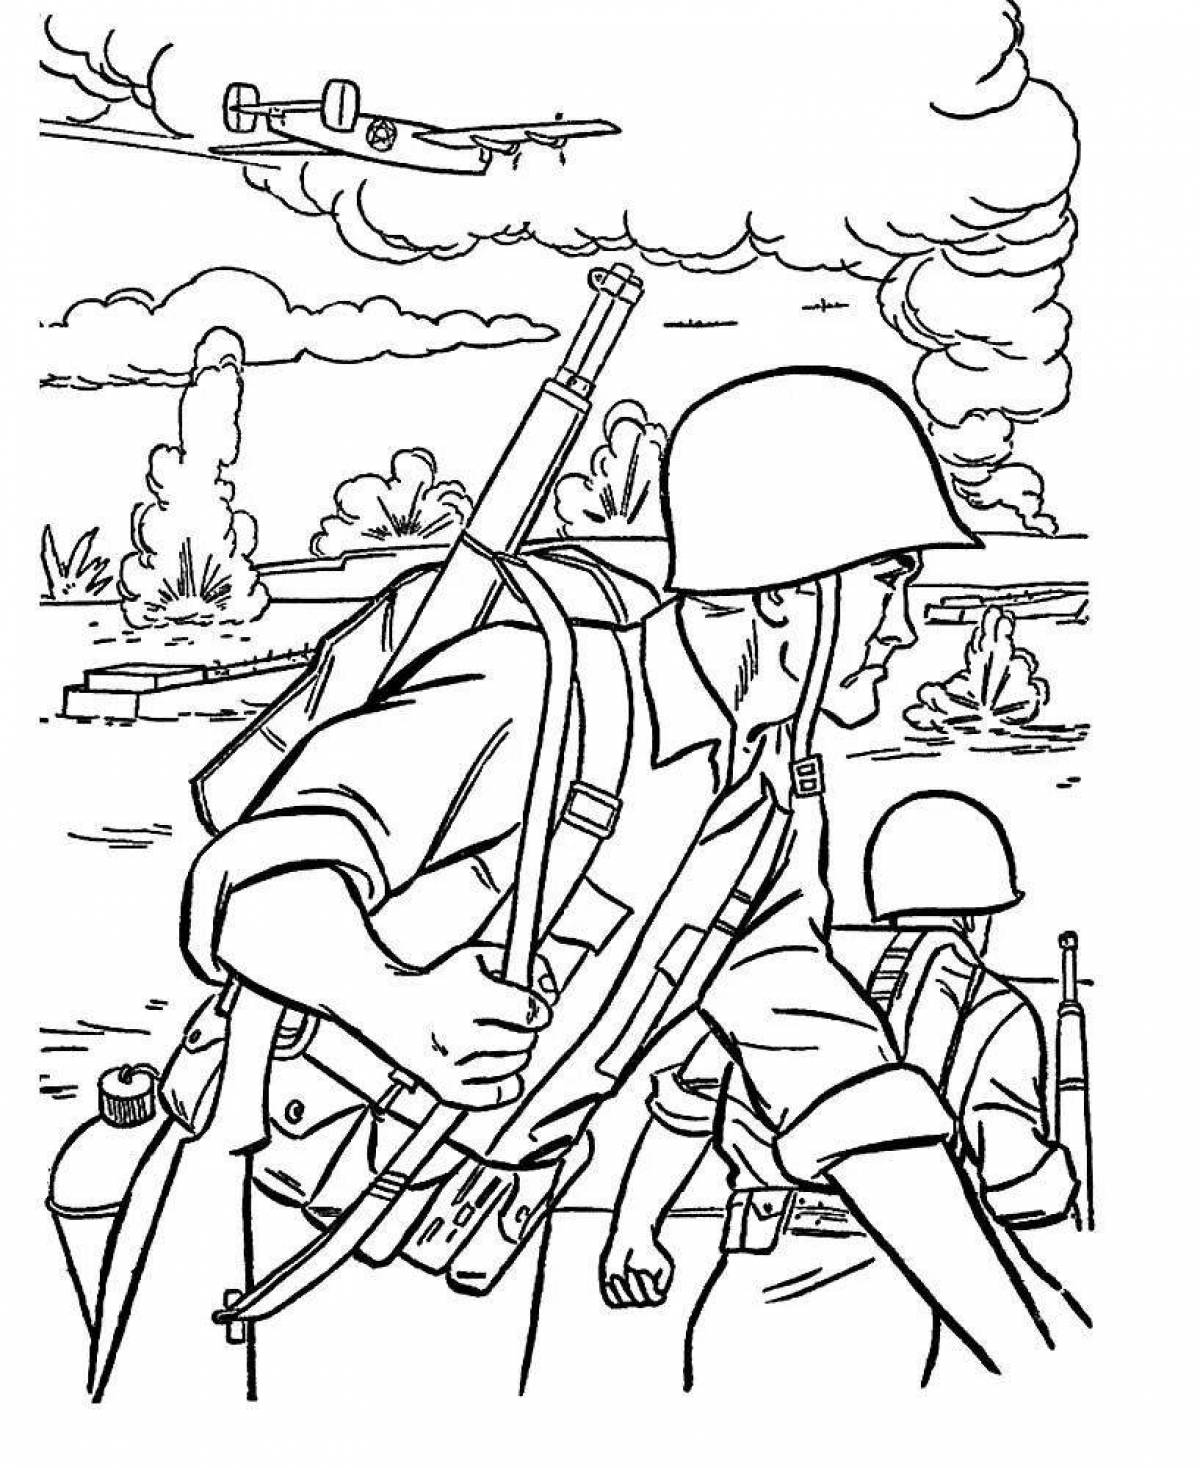 Fearless soldiers coloring pages for kids